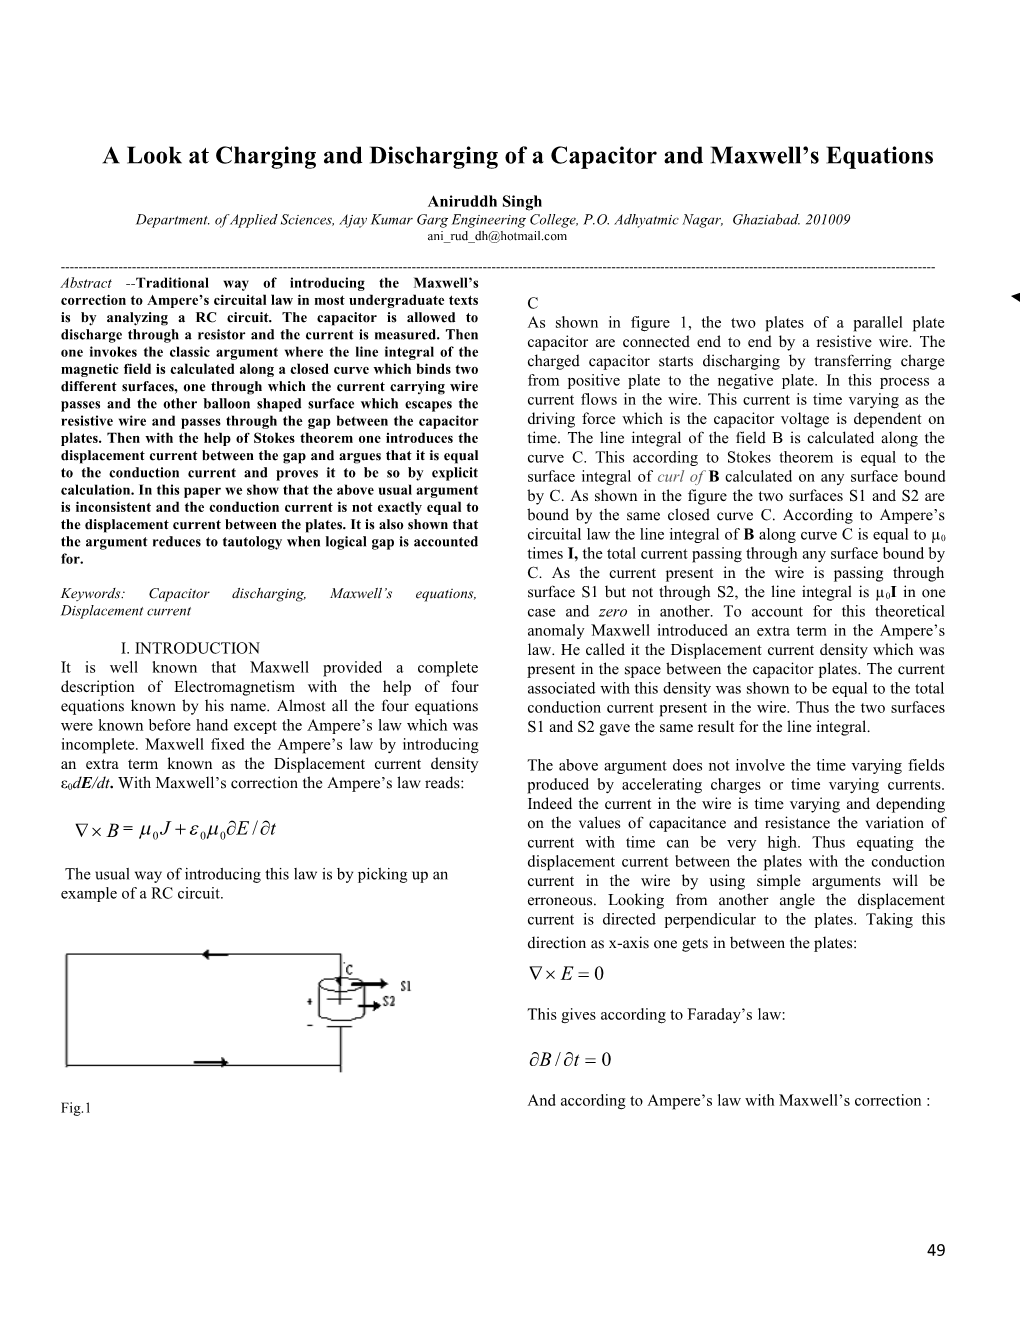 A Look at Discharging of a Capacitor and Maxwell Equations